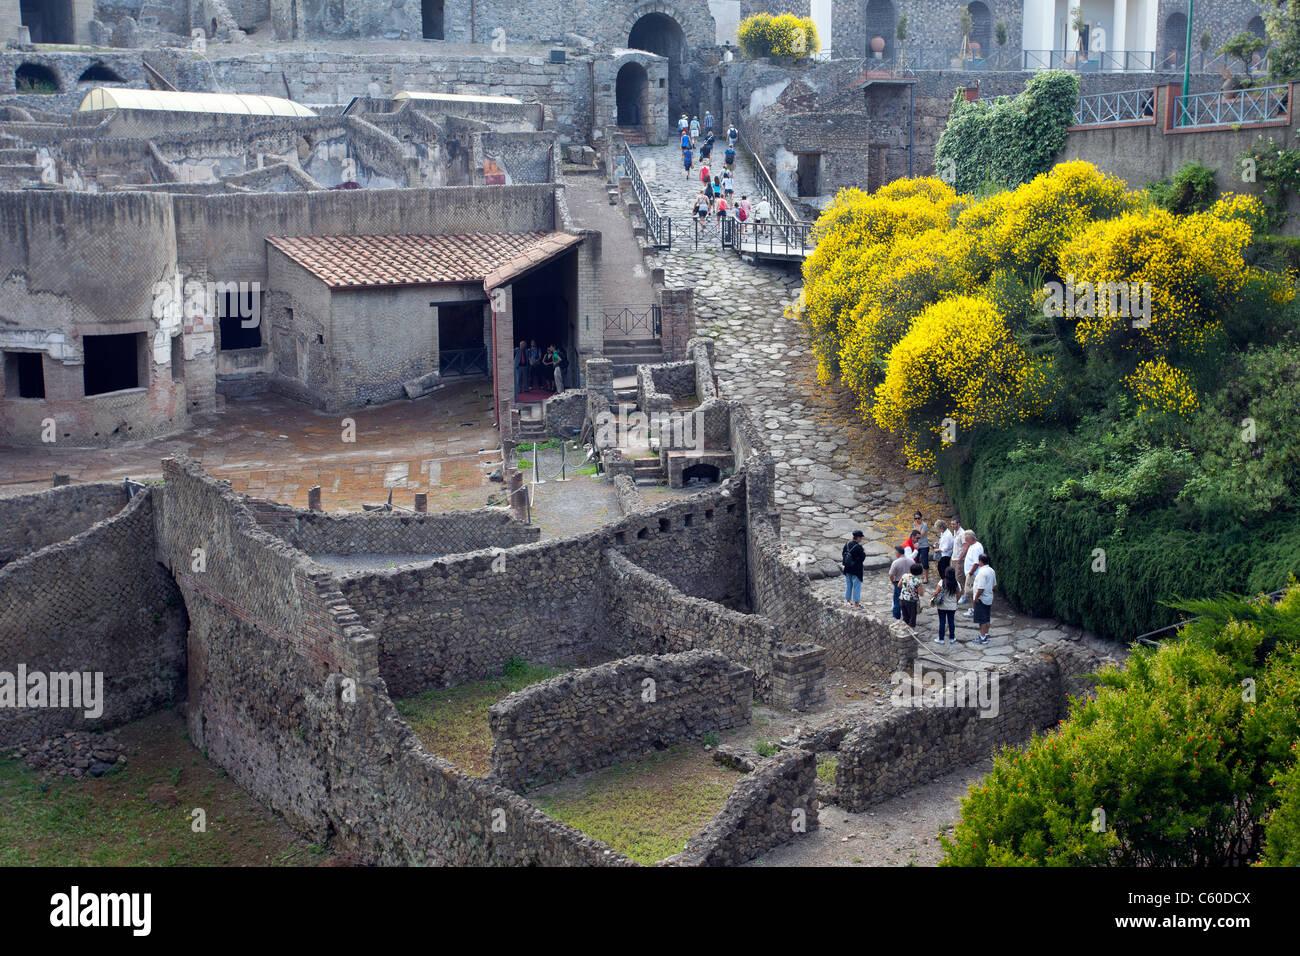 Pompeii Italy ruins of ancient city after the destruction by eruption of Mount Vesuvius volcano.  Entrance to ancient city. Stock Photo